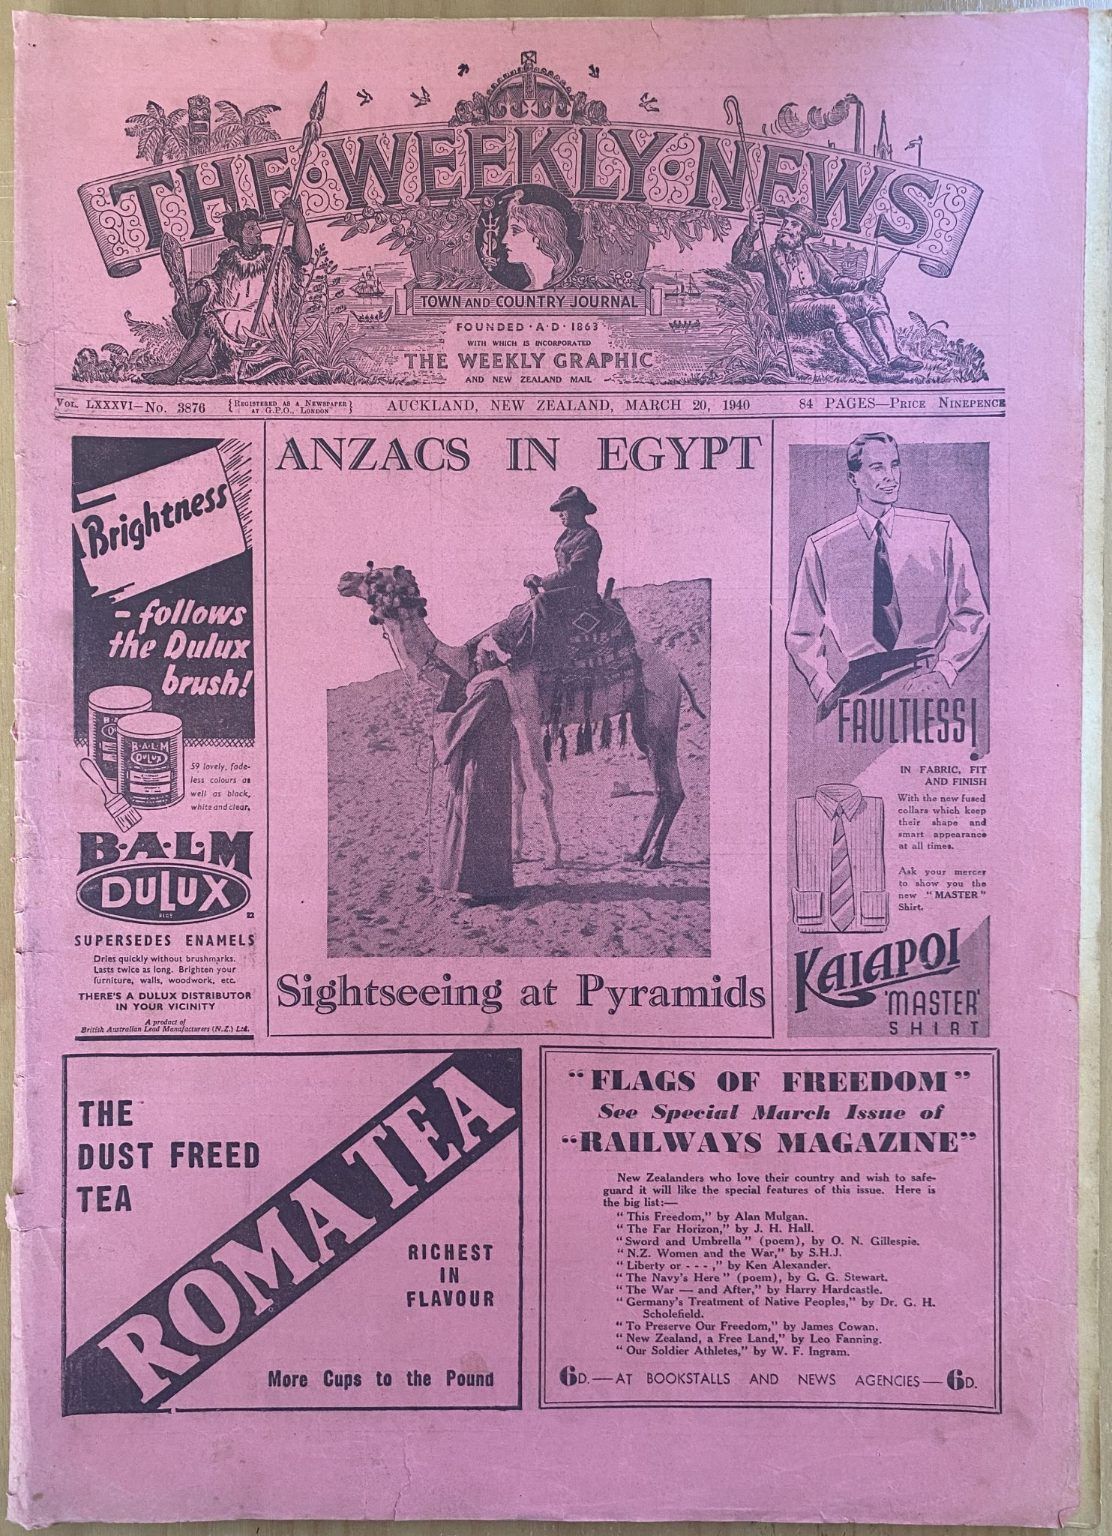 OLD NEWSPAPER: The Weekly News - No. 3876, 20 March 1940